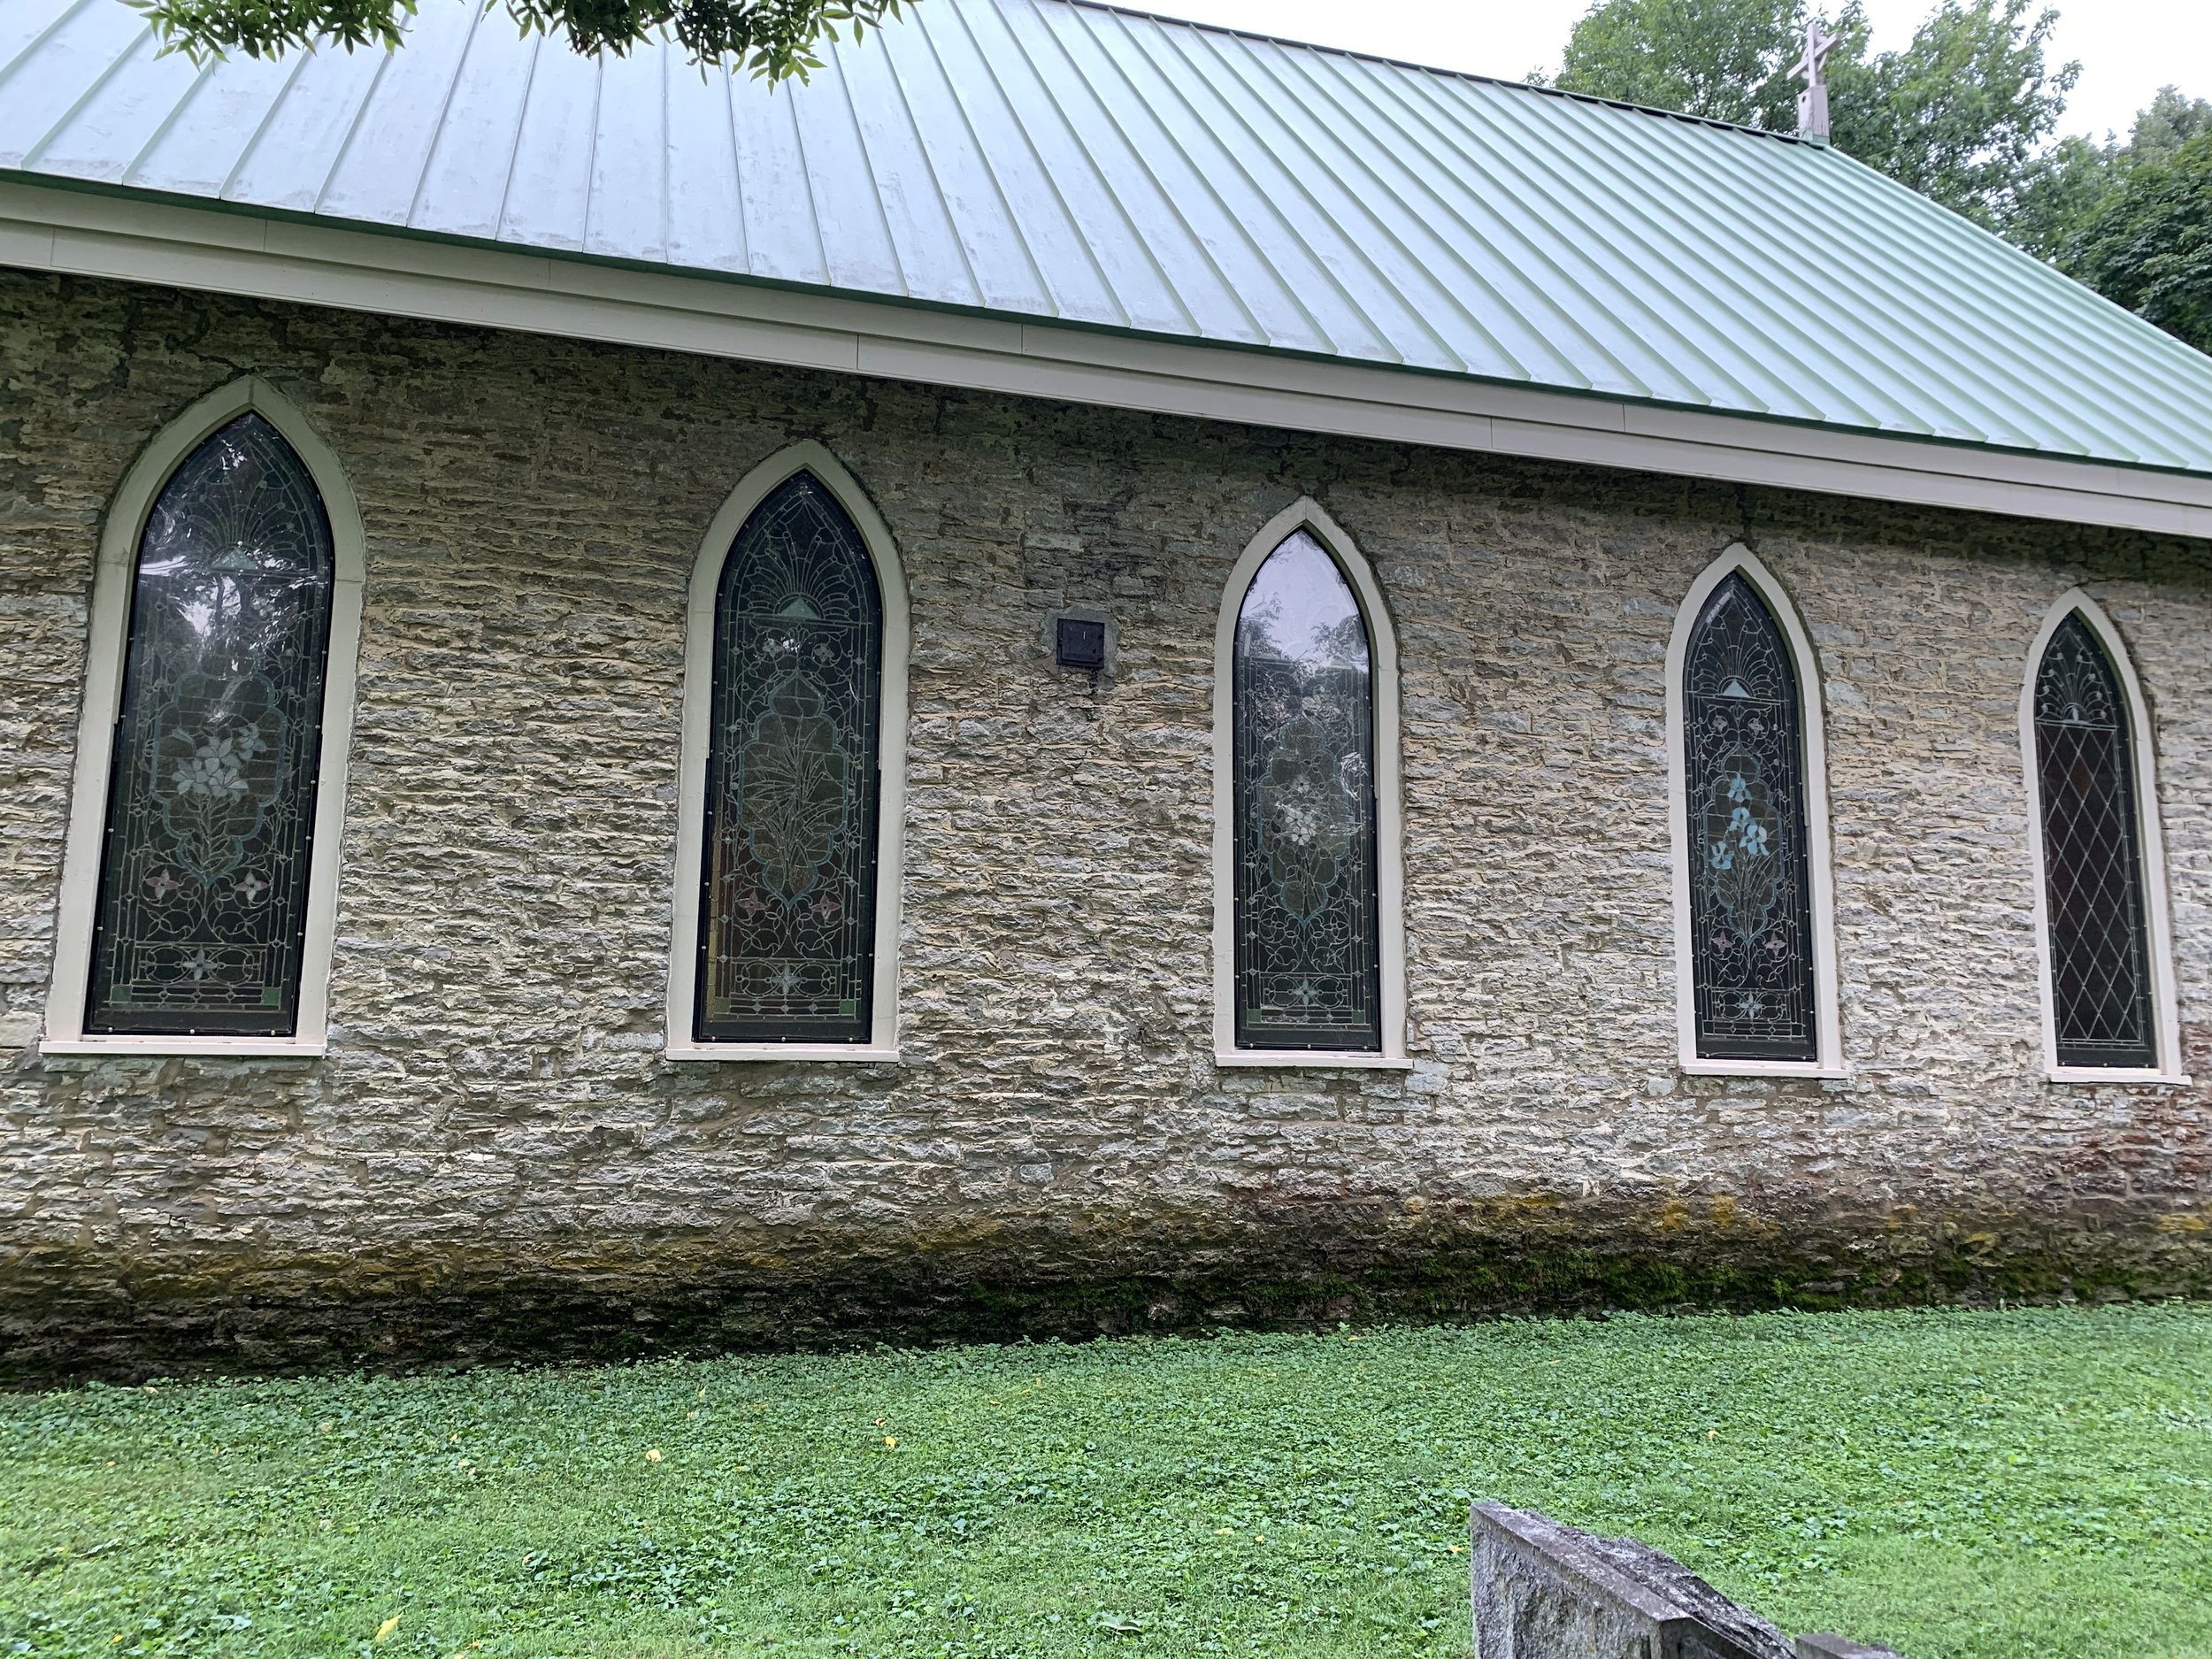 Side B of the Church with Stained Glass Windows